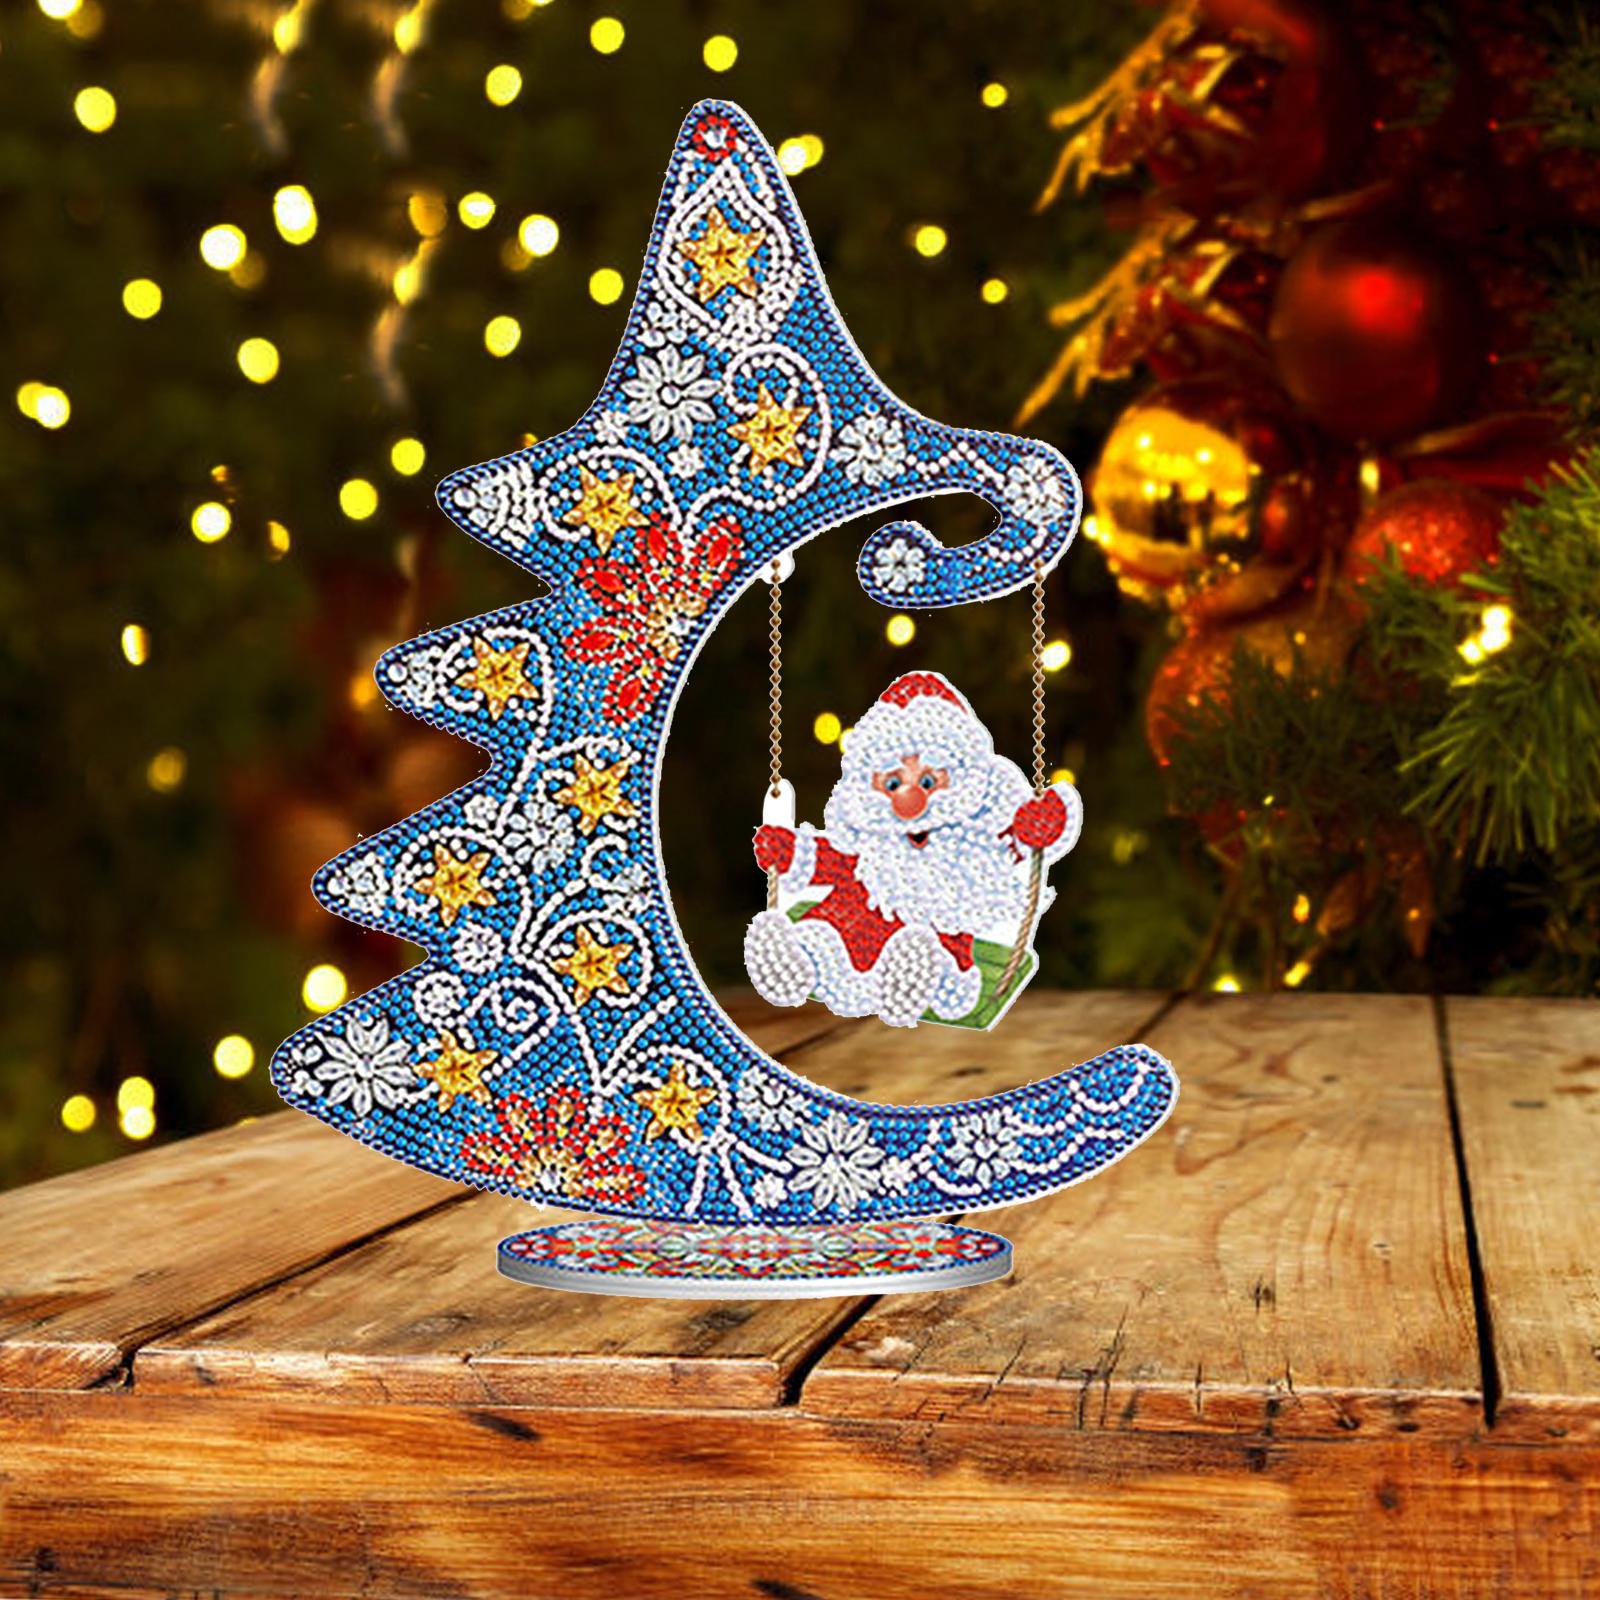 Diamond Painting Christmas Tree Craft 5D DIY Kit Ornament Gifts for New Year 23x29.5cm